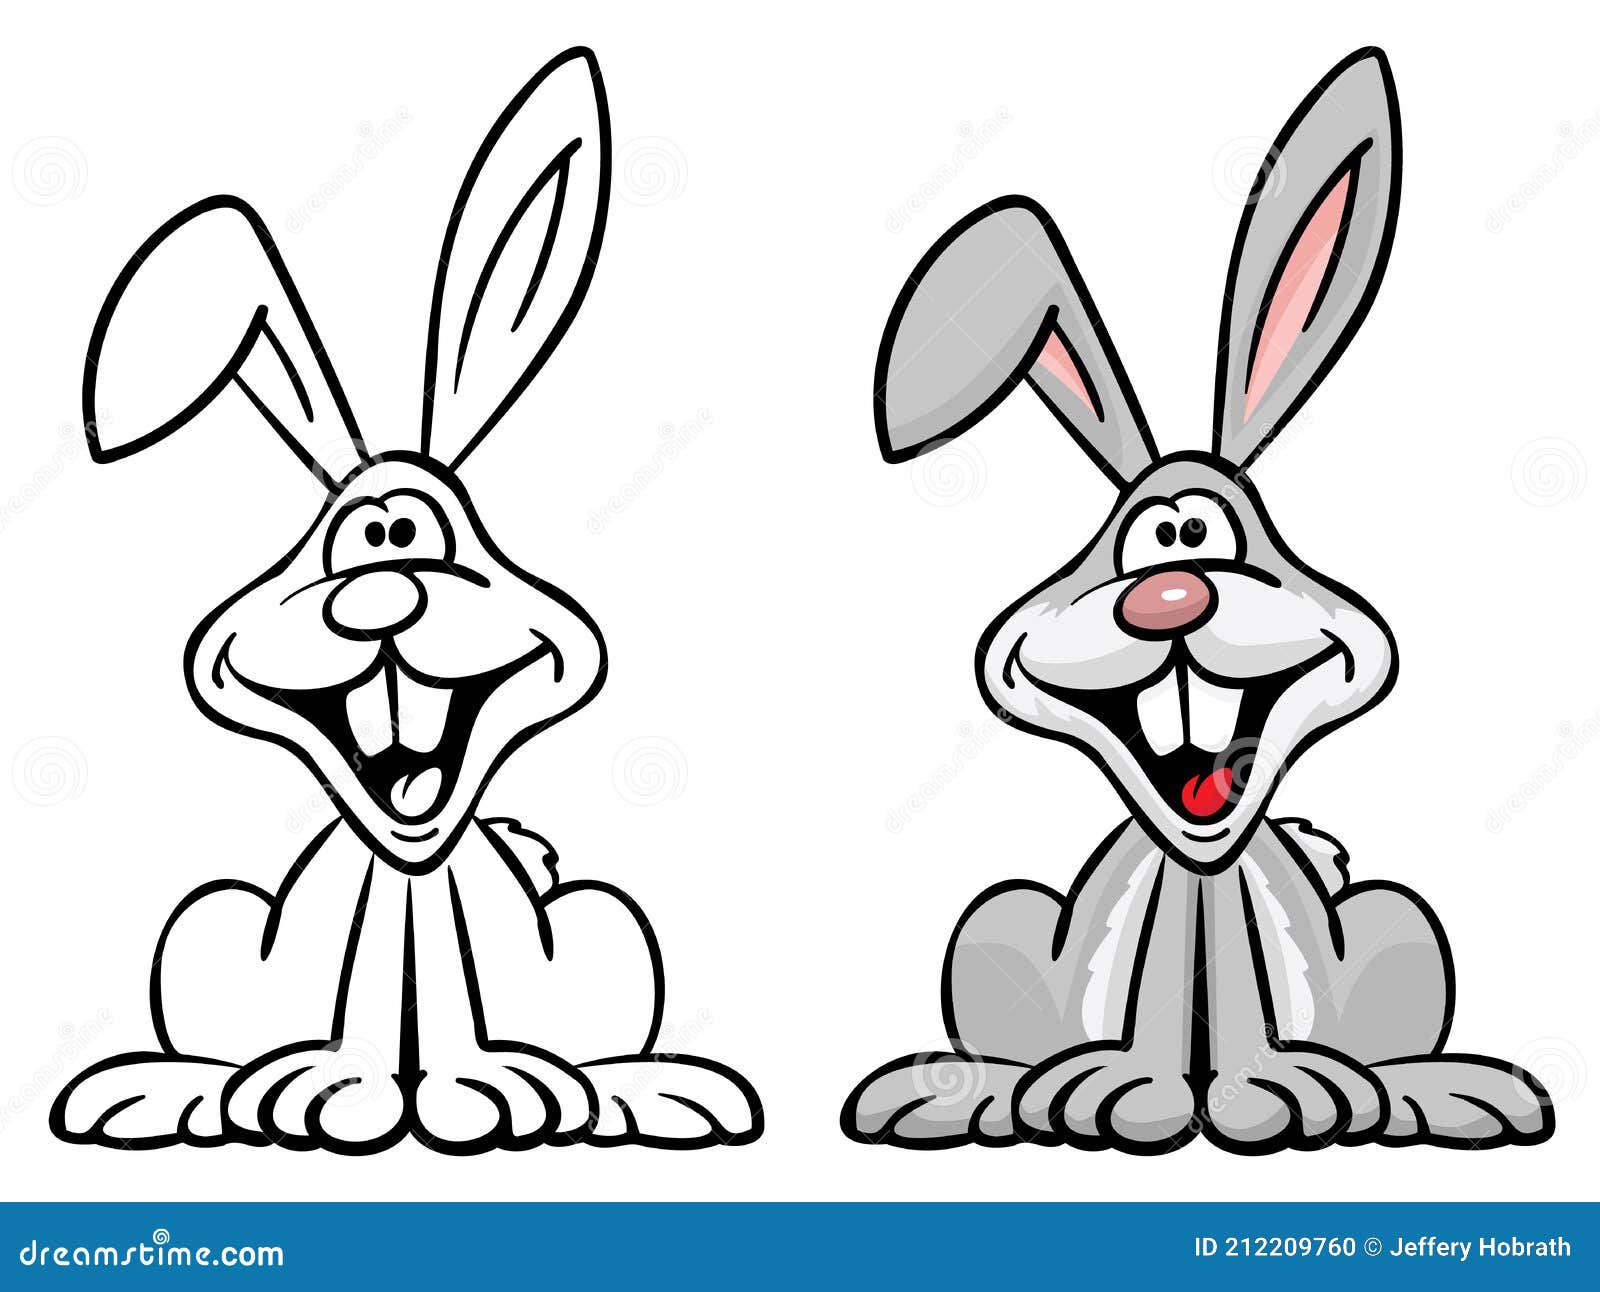 Happy Bunny Rabbit Cartoon in Color and Black Line Art Isolated Vector  Illustration Stock Vector - Illustration of cheerful, editing: 212209760